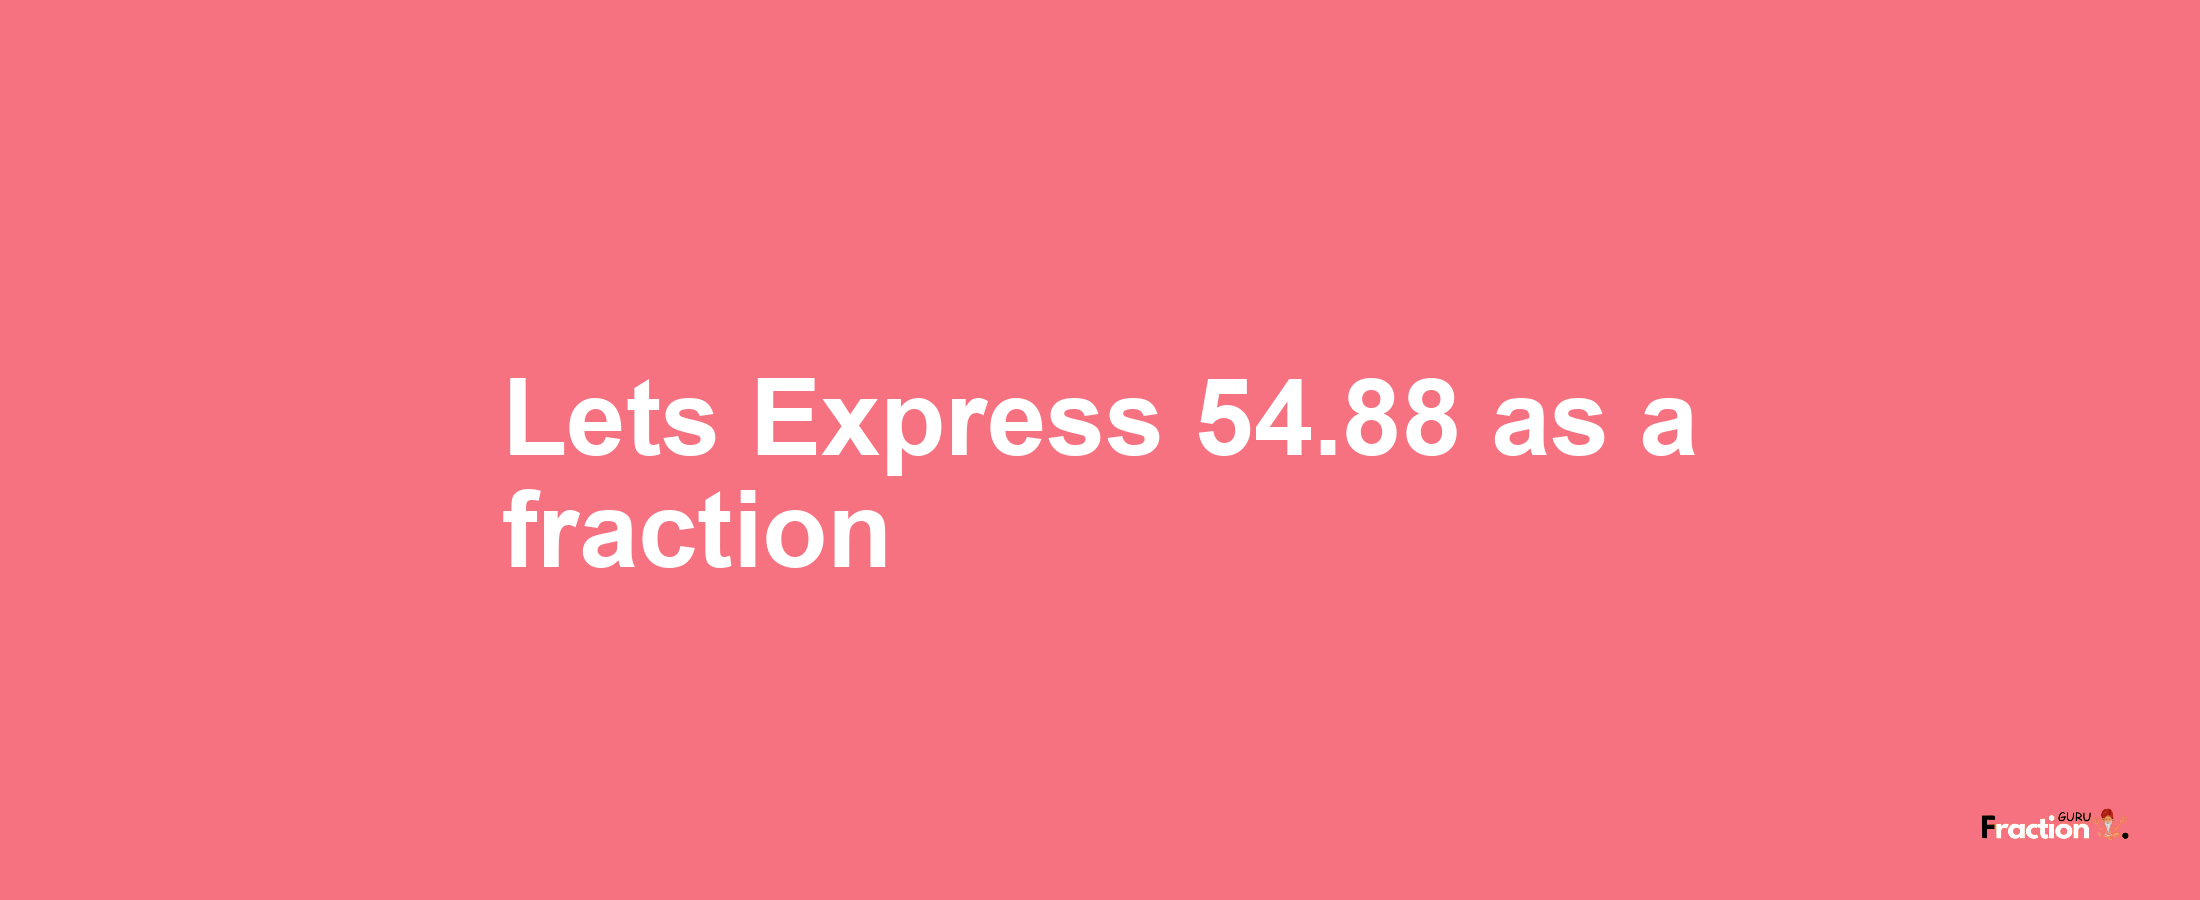 Lets Express 54.88 as afraction